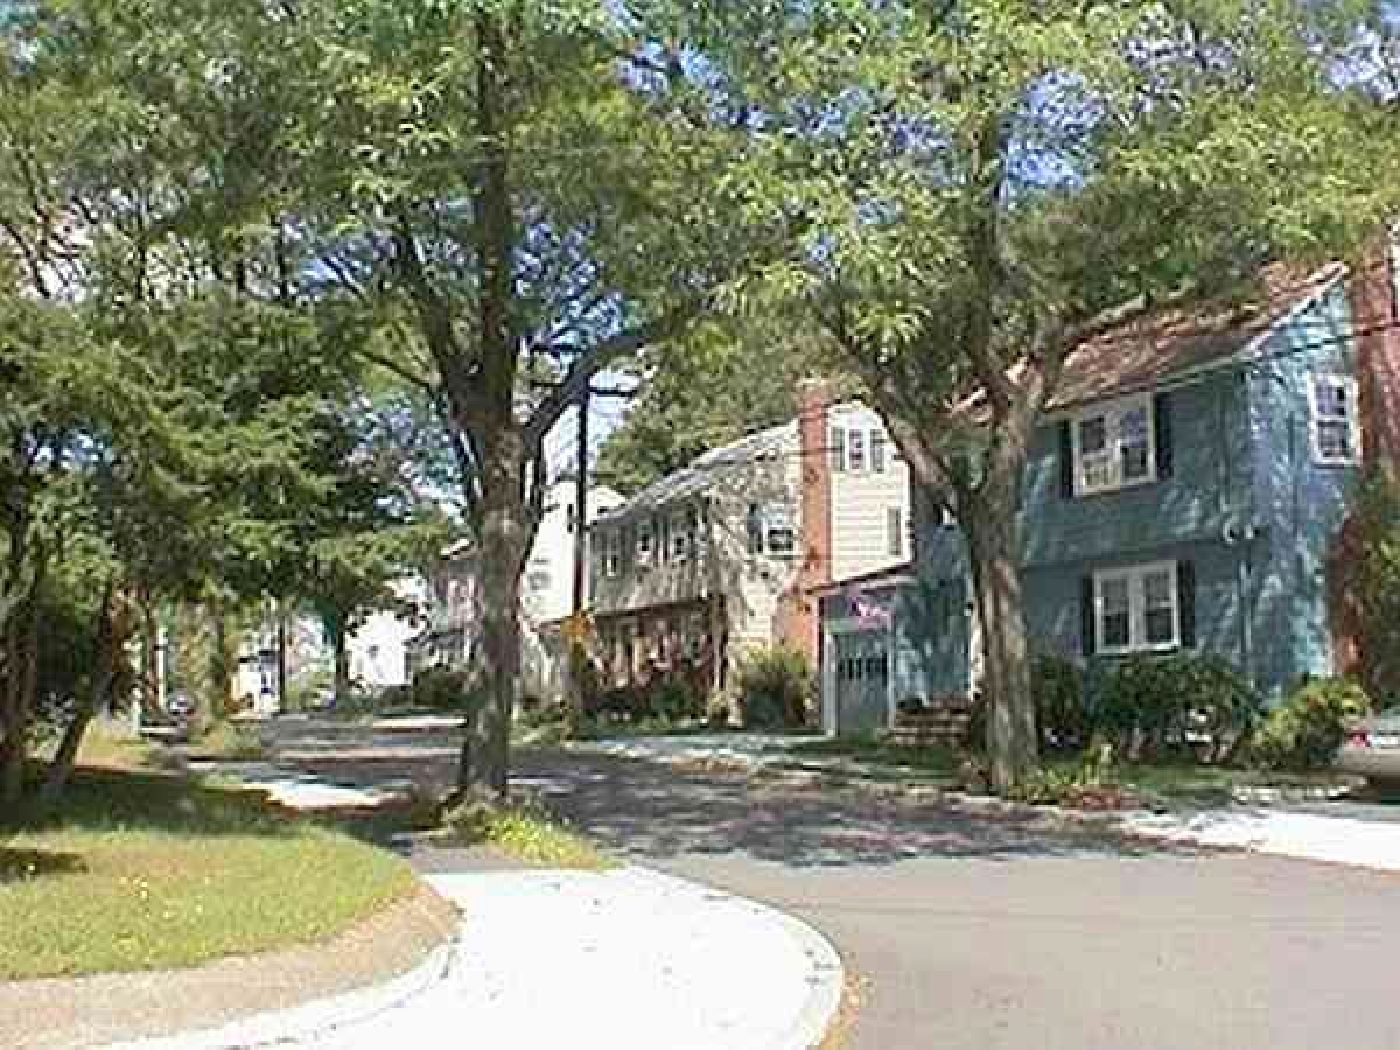 Colonial houses on Range Road, Dorchester, Boston